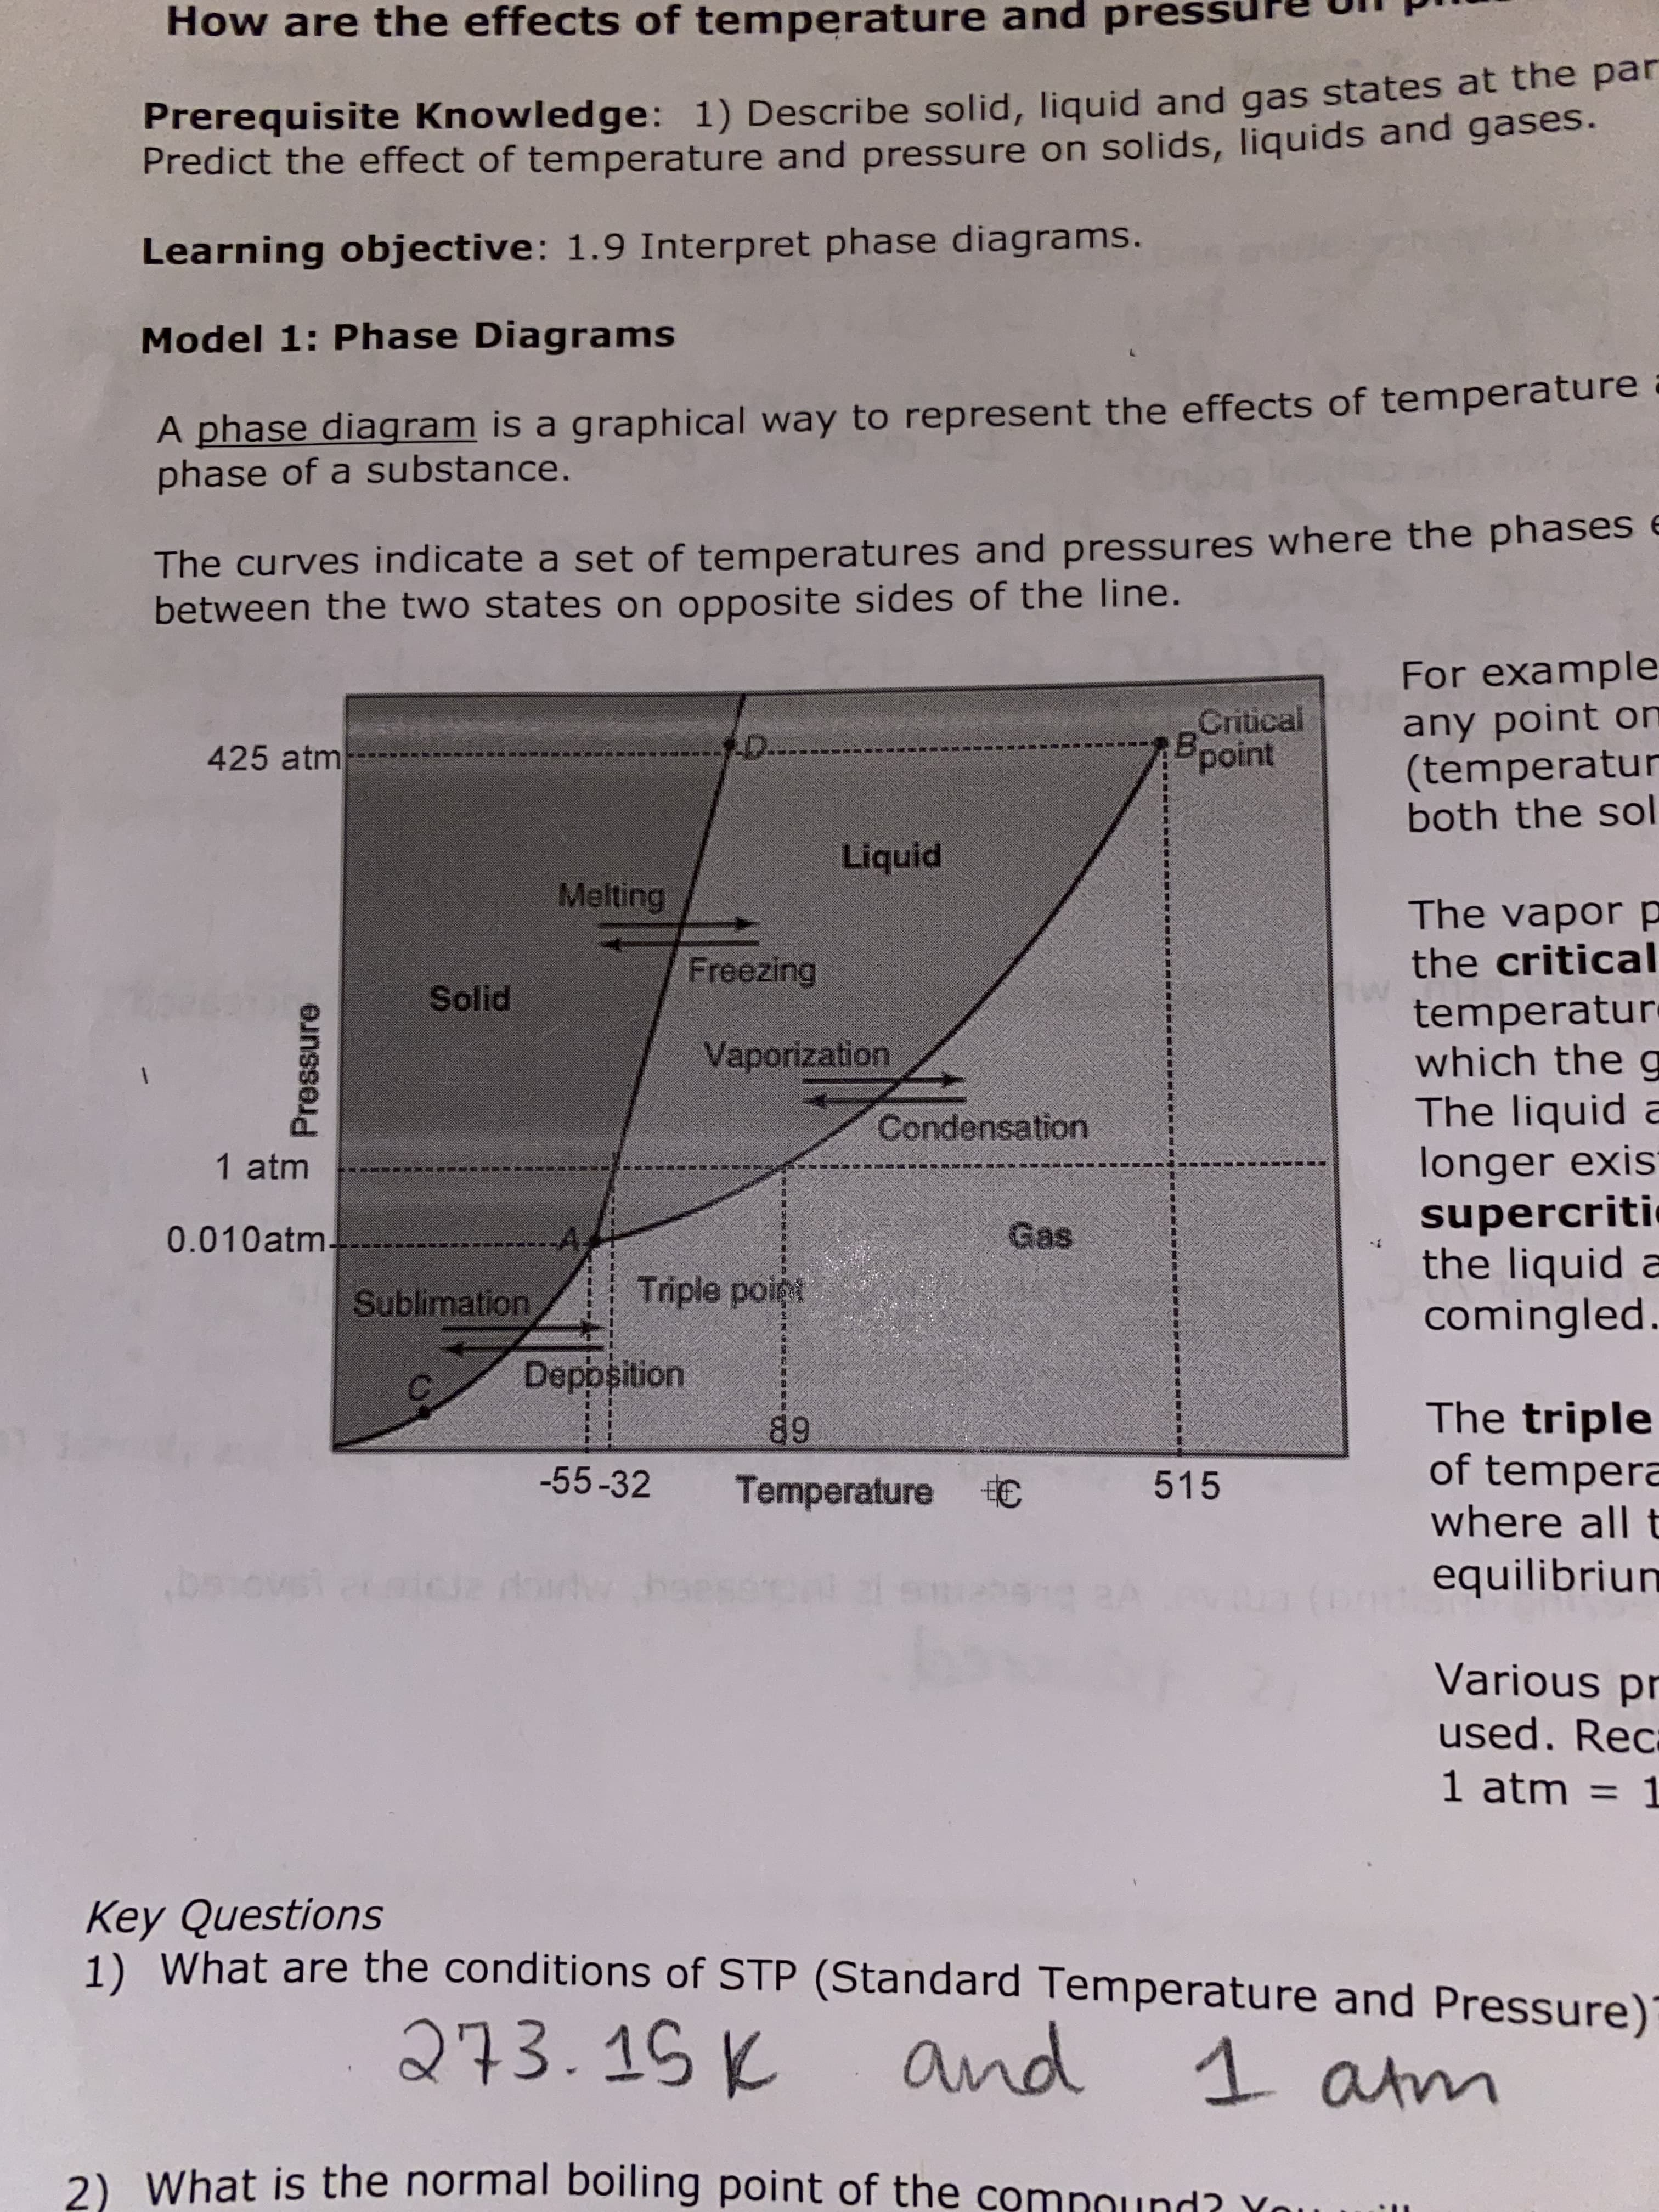 How are the effects of temperature and pres
Prerequisite Knowledge: 1) Describe solid, liquid and gas states at the par
Predict the effect of temperature and pressure on solids, liquids and gases.
Learning objective: 1.9 Interpret phase diagrams.
Model 1: Phase Diagrams
A phase diagram is a graphical way to represent the effects of temperature
phase of a substance.
The curves indicate a set of temperatures and pressures where the phases e
between the two states on opposite sides of the line.
For example
any point on
(temperatur
both the sol
Critical
Bpoint
-D.
425 atm
Liquid
Melting
The vapor p
the critical
Freezing
Solid
temperatur-
which the g
The liquid a
longer exis
supercriti
the liquid a
comingled
Vaporization
Condensation
1 atm
0.010atm-
Gas
Triple poigi
Sublimation
Deppsition
The triple
of tempera
where all t
89
-55-32
515
Temperature C
equilibriun
baiovst
Various pr
used. Rec
1 atm = 1
Key Questions
1) What are the conditions of STP (Standard Temperature and Pressure)
273.15K
and 1 atm
2) What is the normal boiling point of the comnound? You
Pressure
